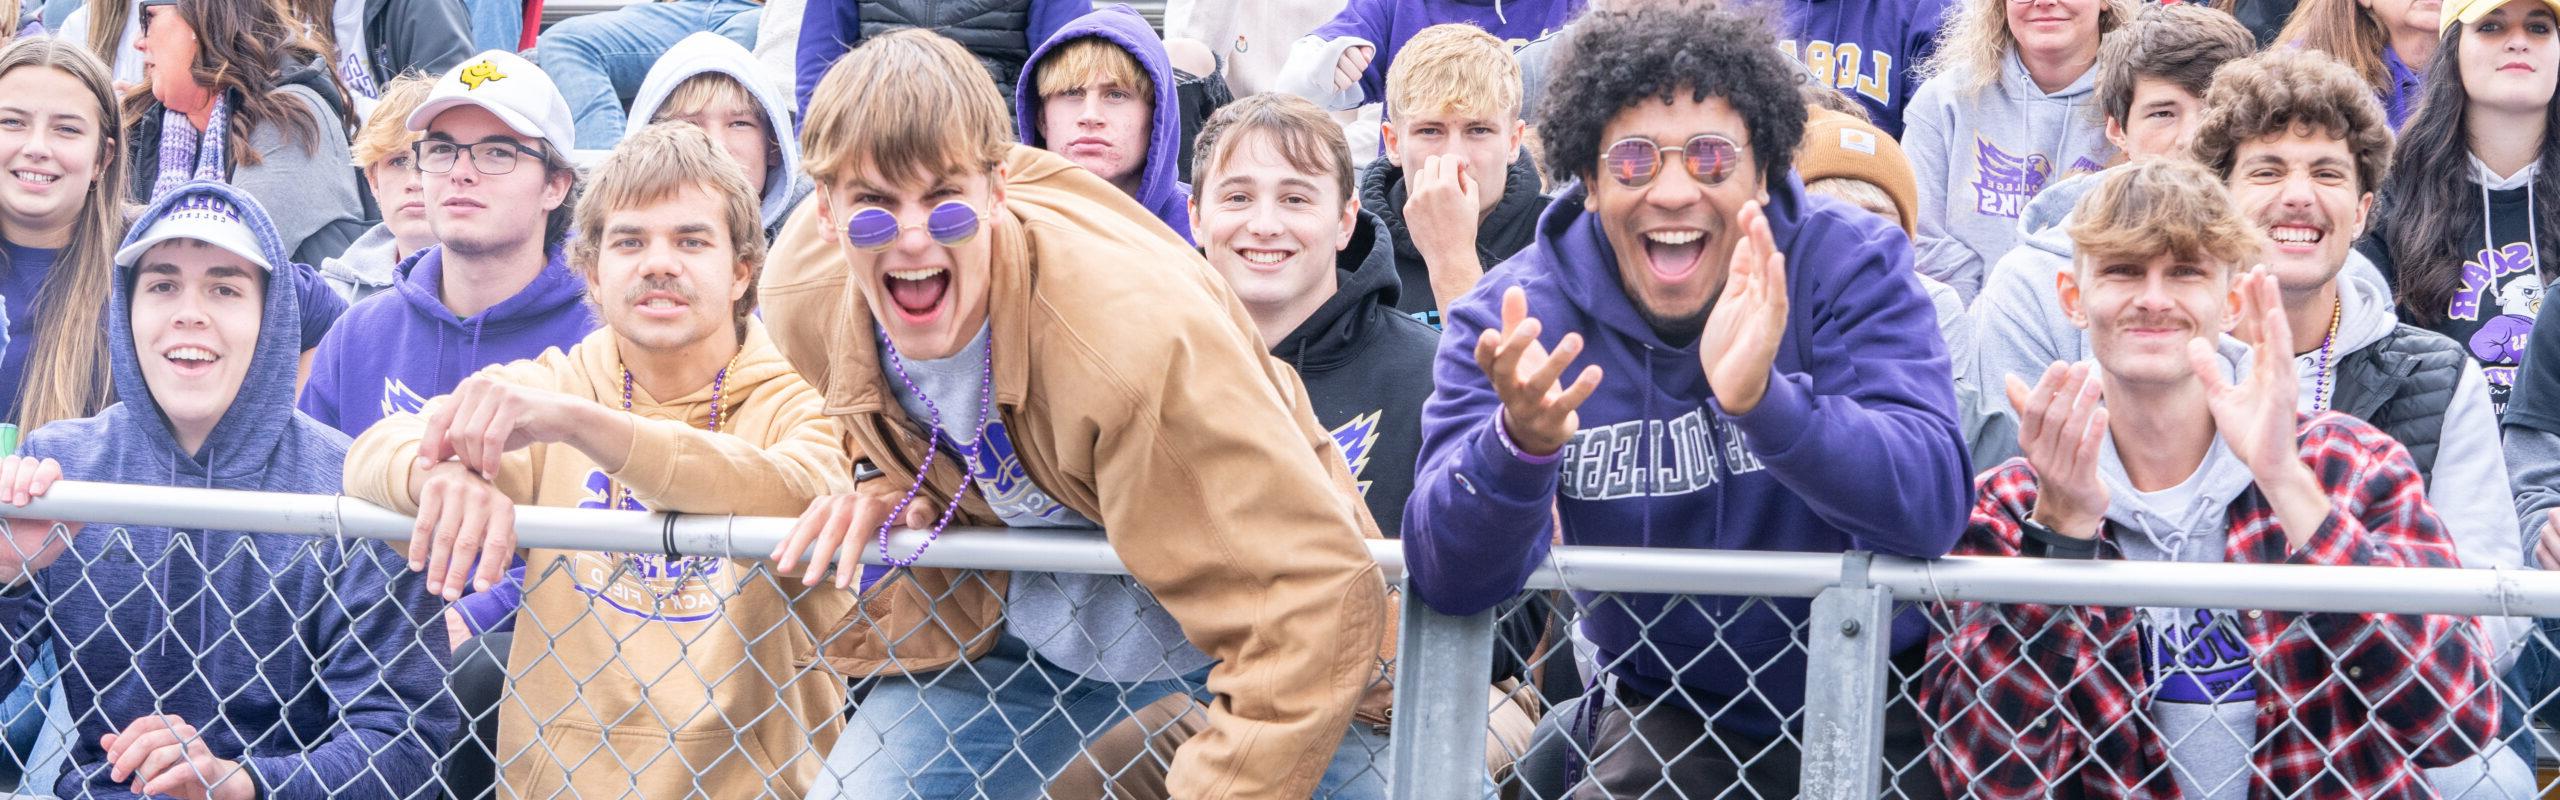 Duhawks At The Rock Bowl Stadium Cheering For A Game